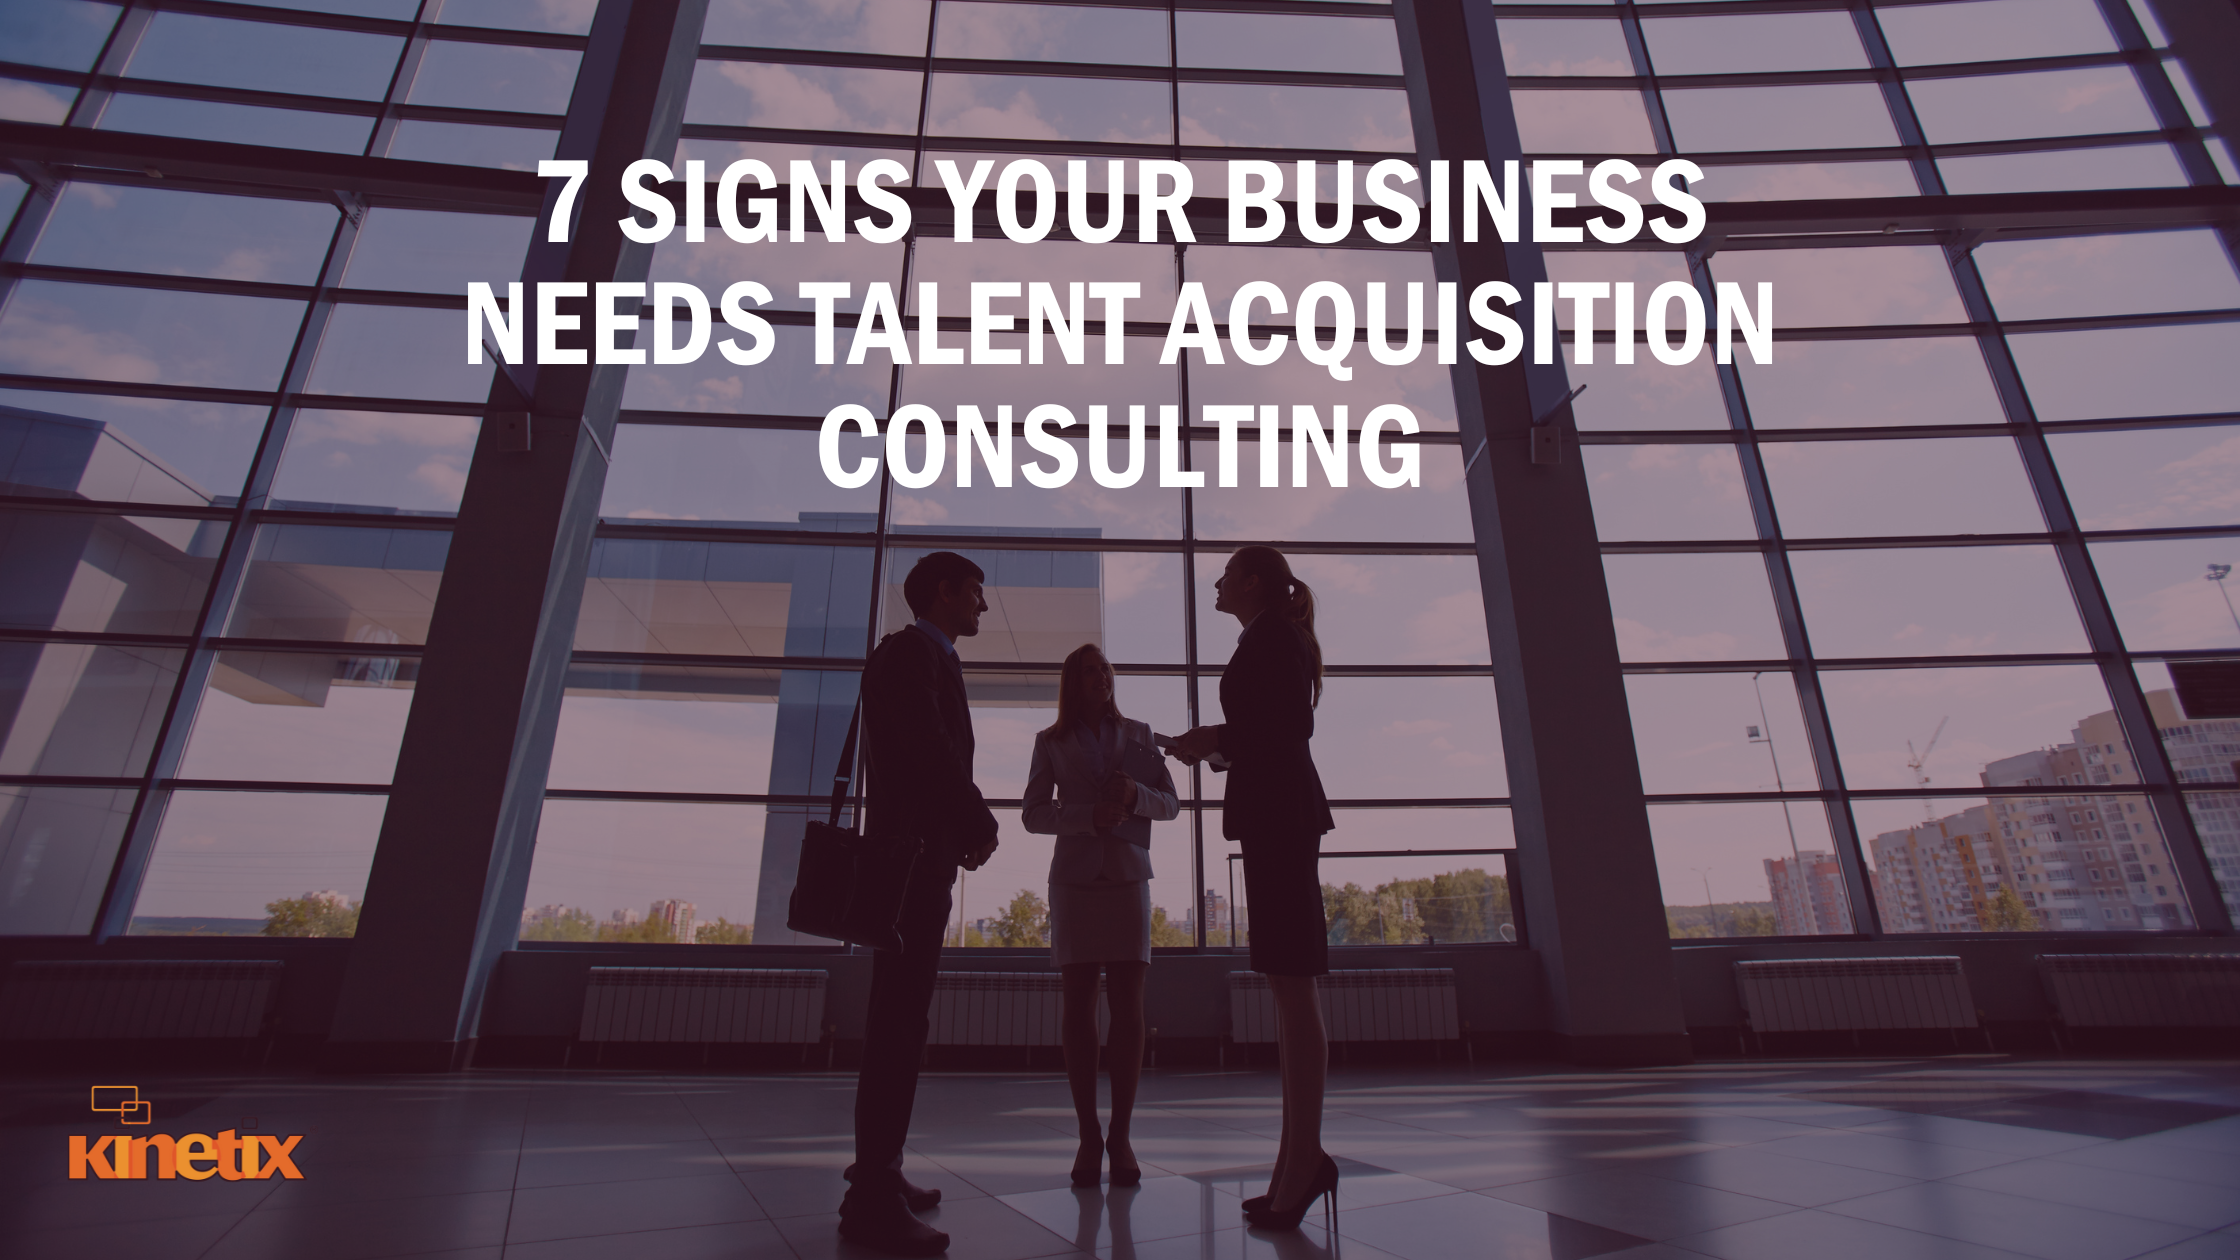 7 Signs Your Business Needs Talent Acquisition Consulting